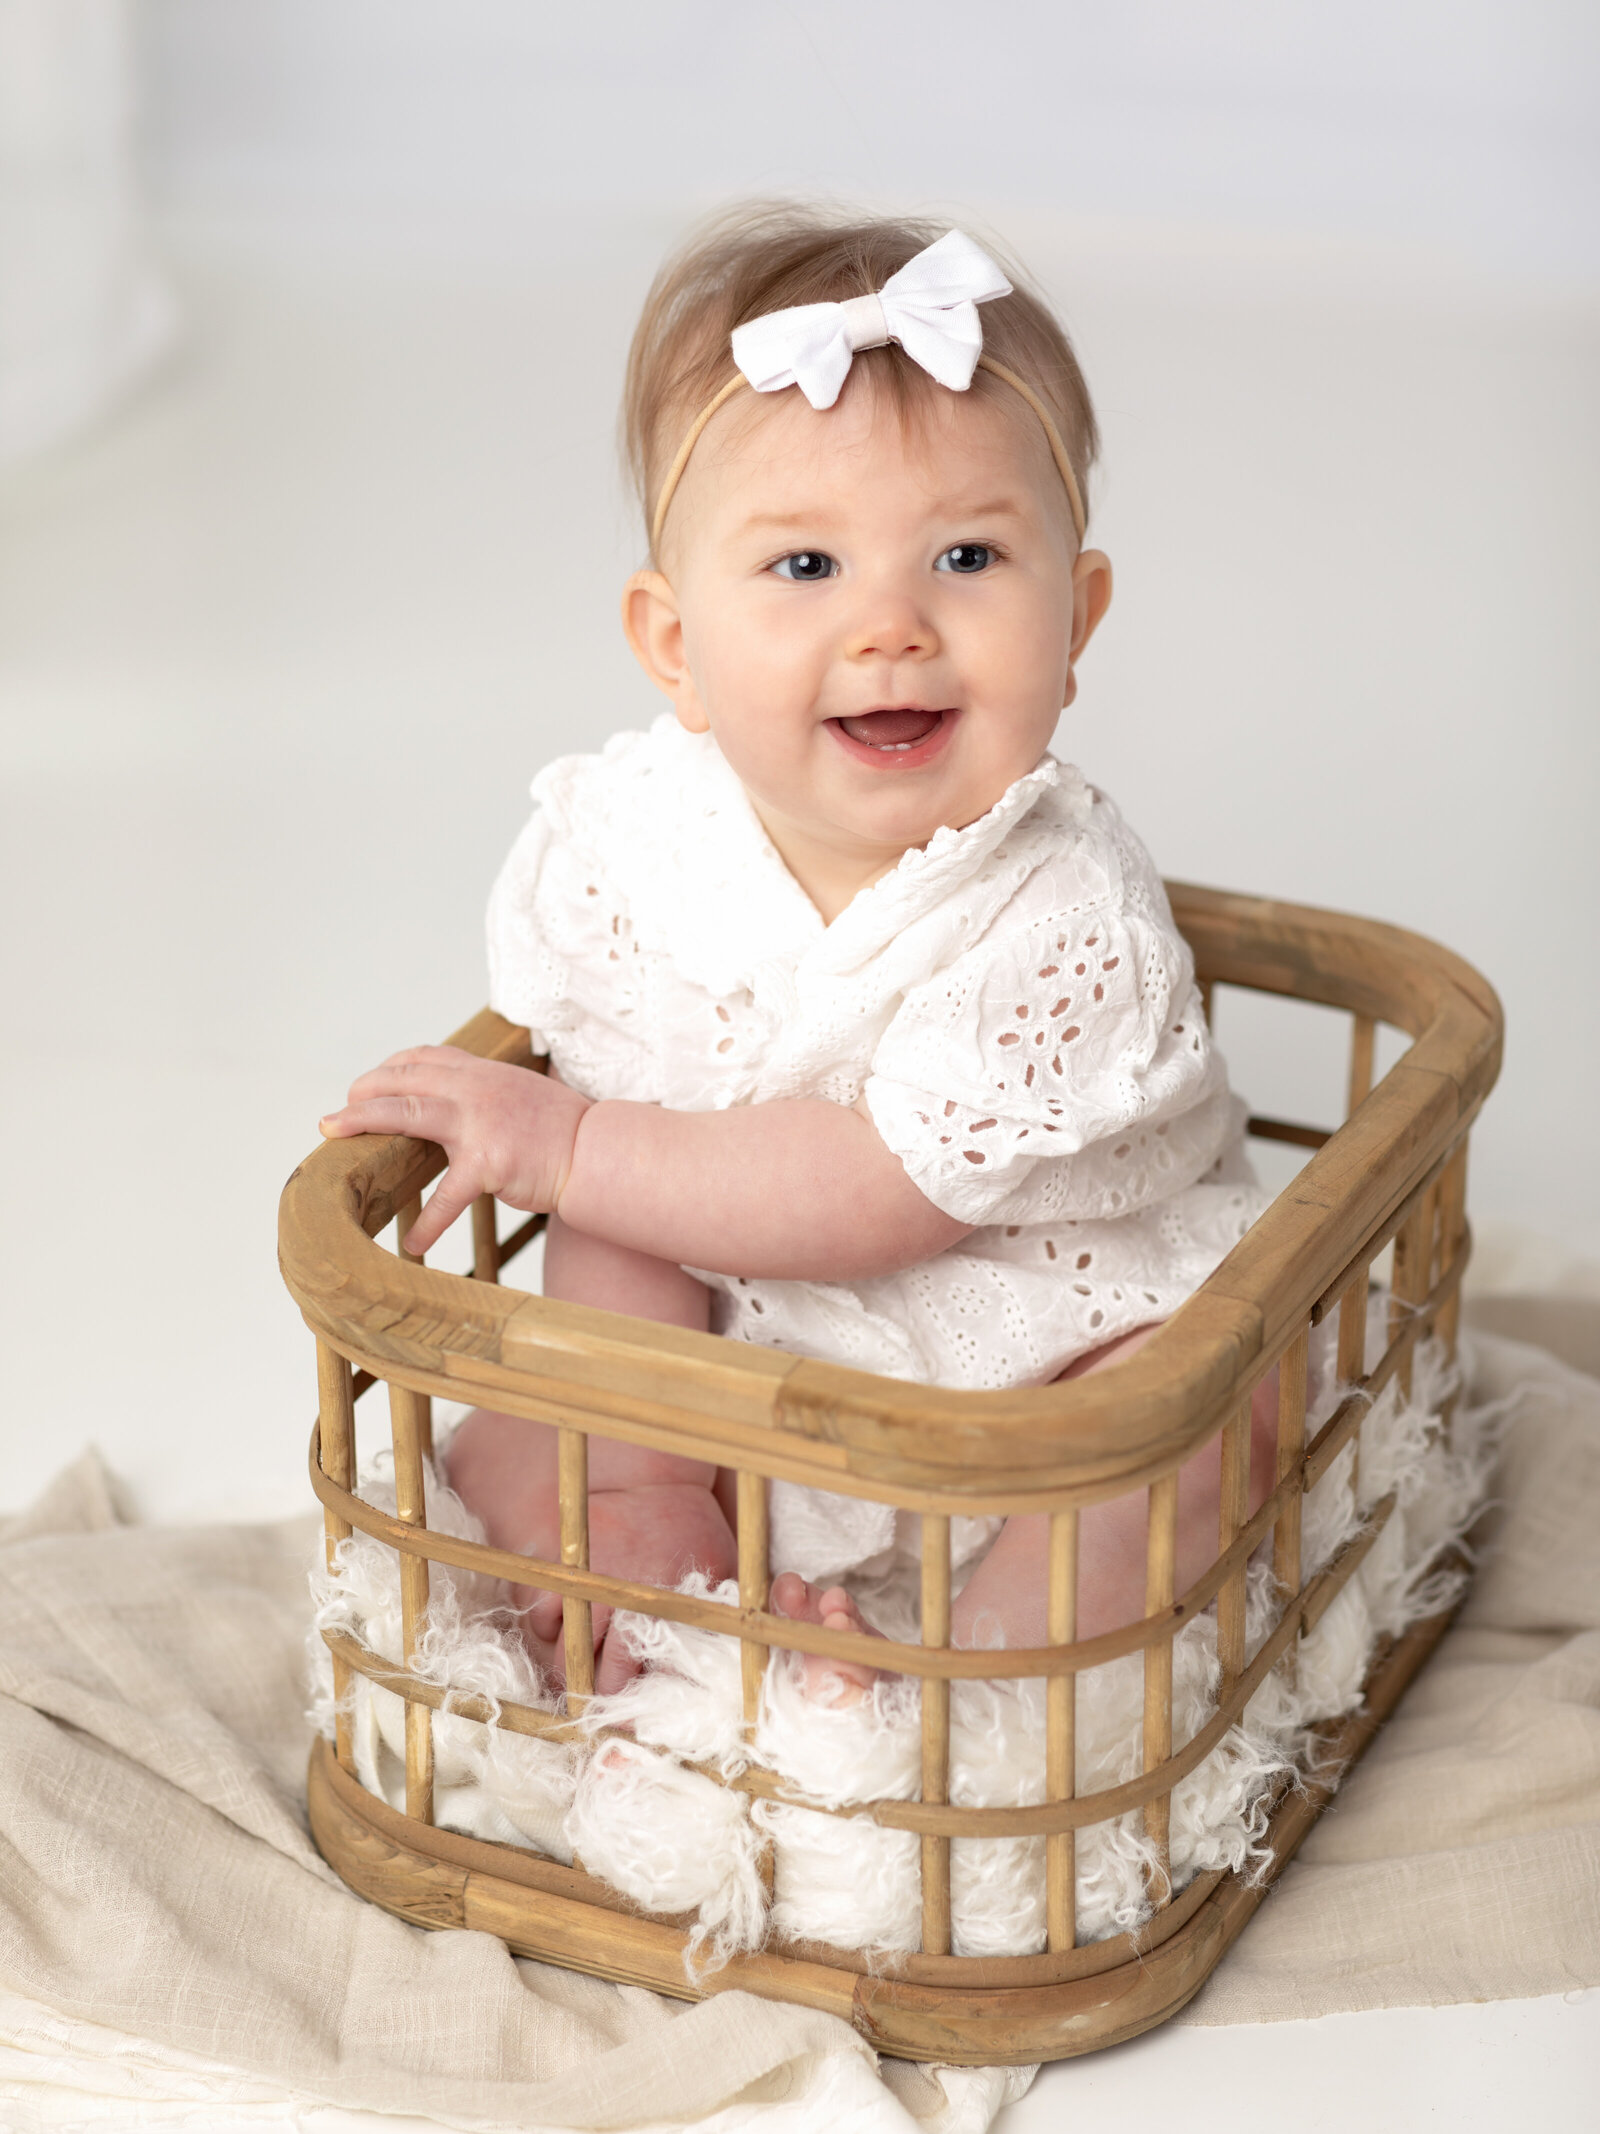 6 month old girl in white outfit sitting in basket for family photos cleveland family photography